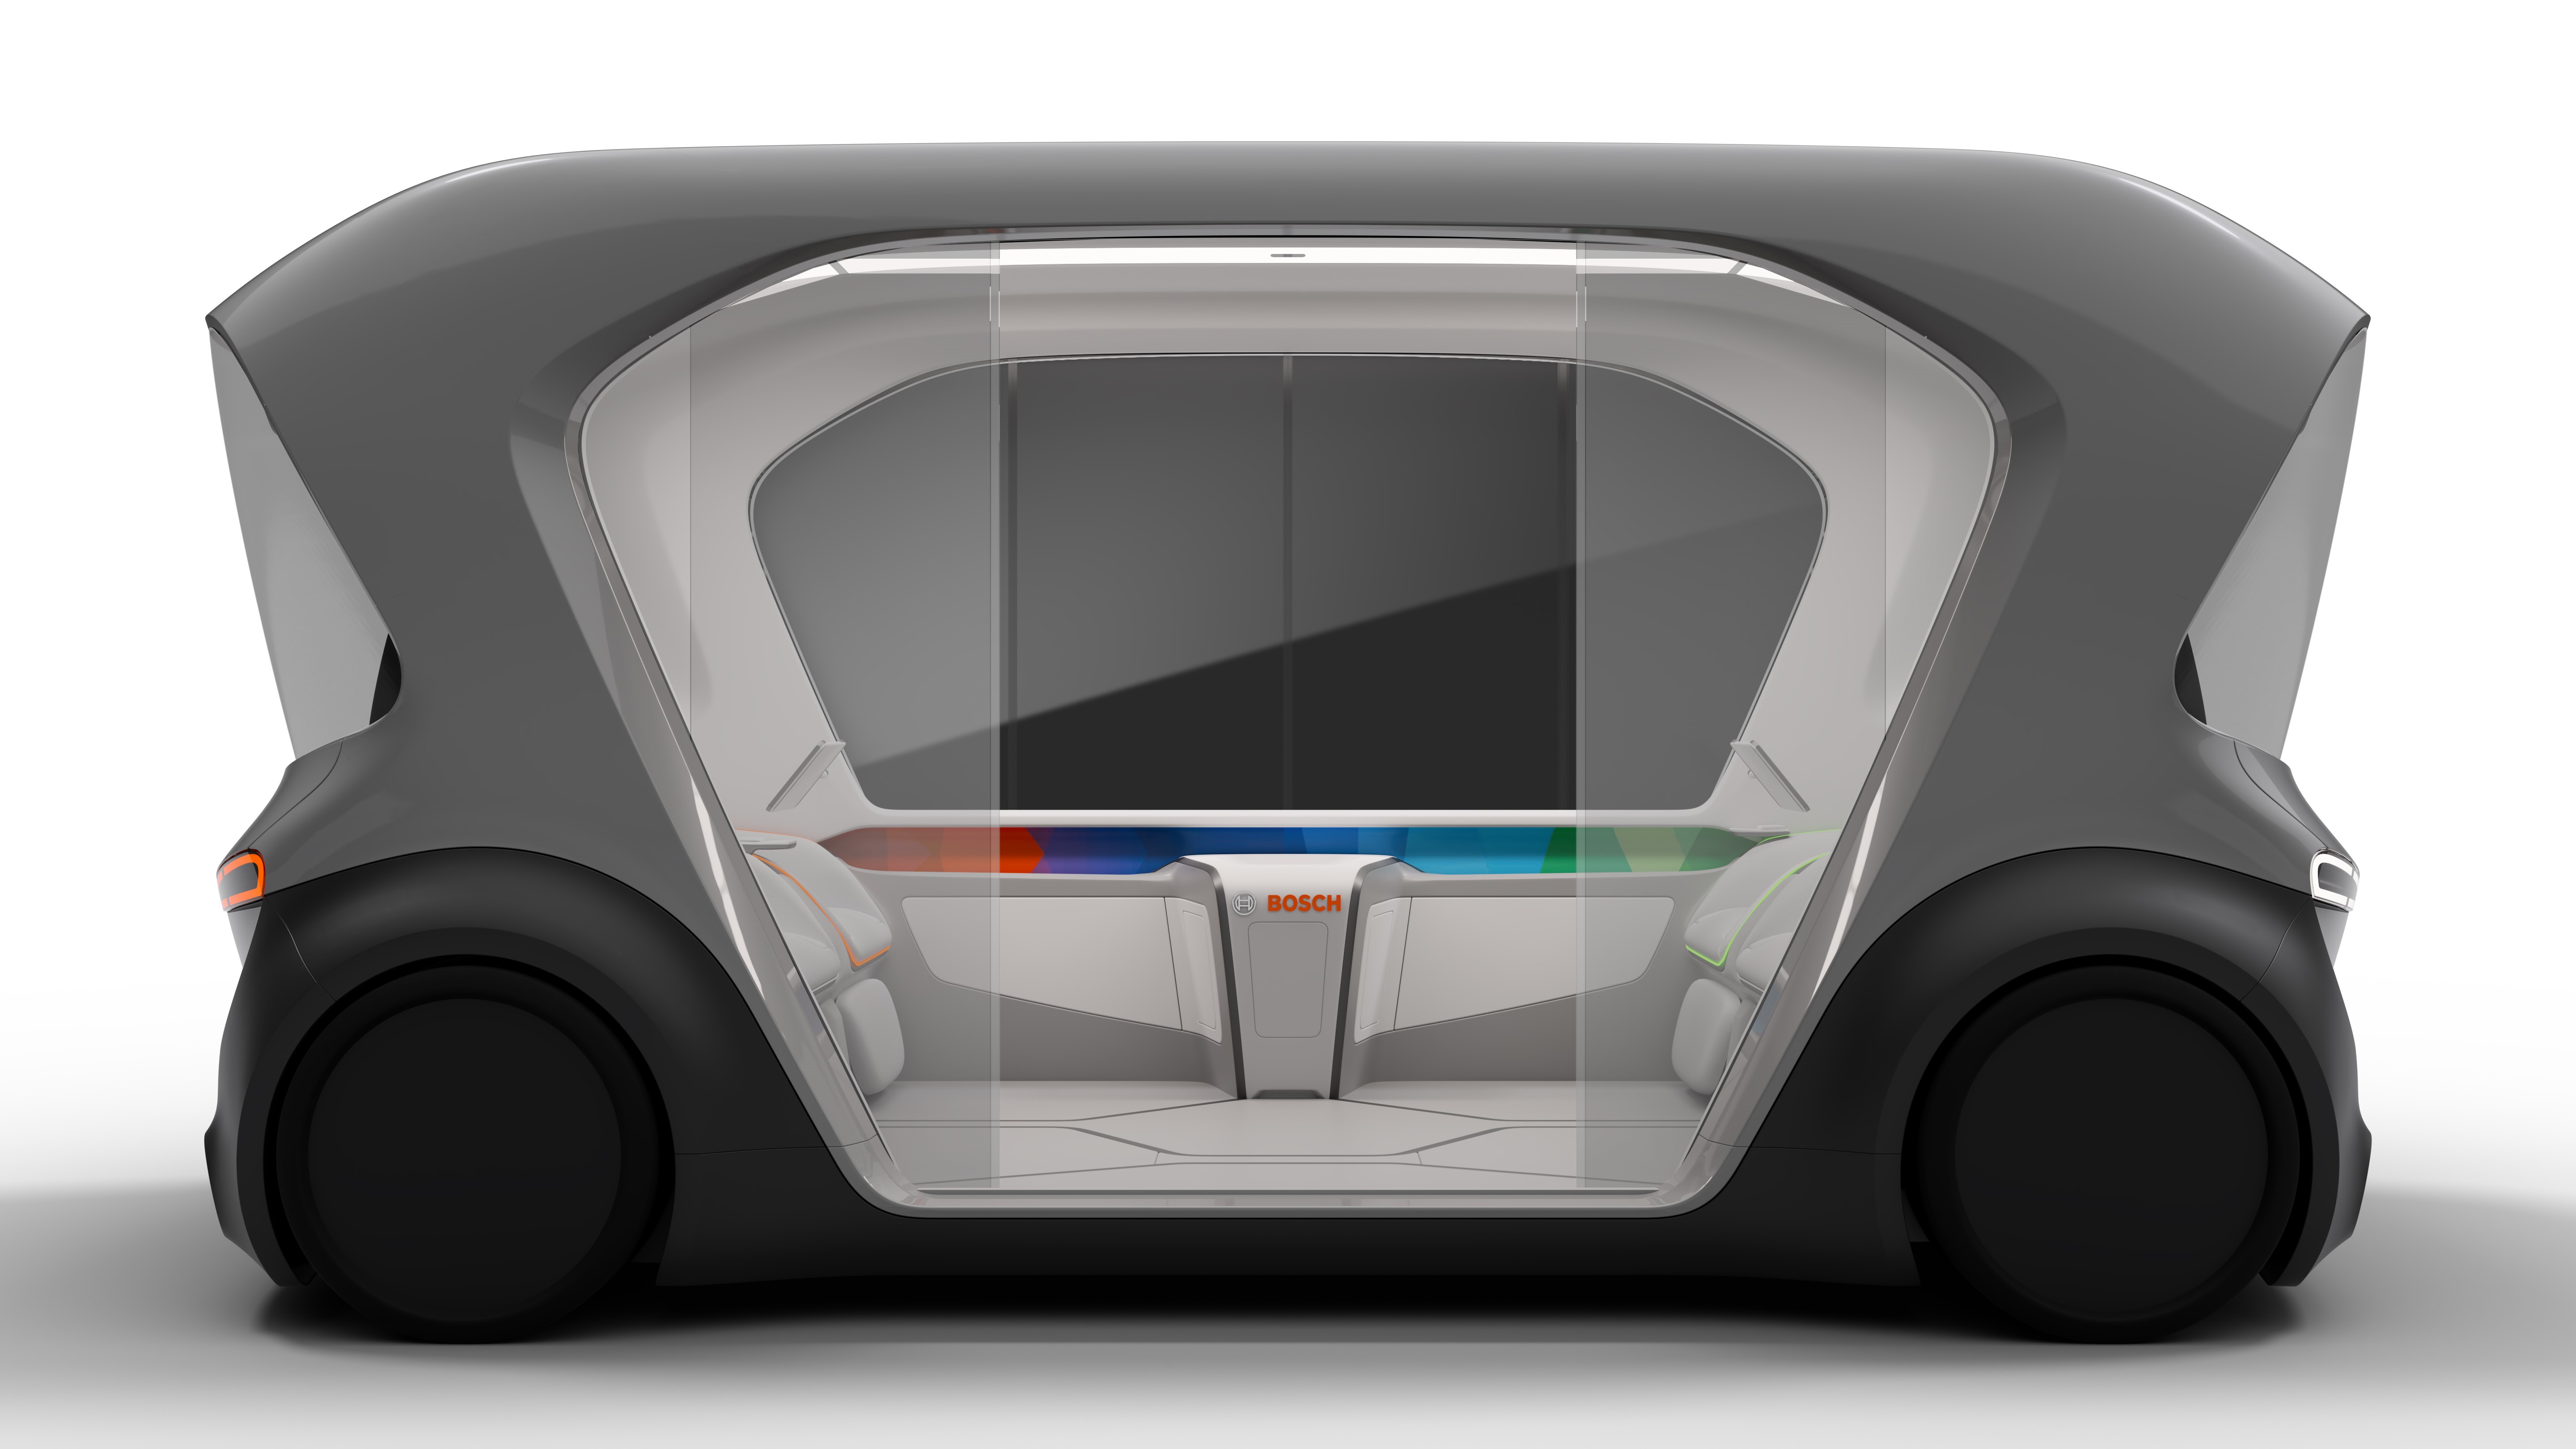 Debut of new concept shuttle at CES 2019 in Las Vegas